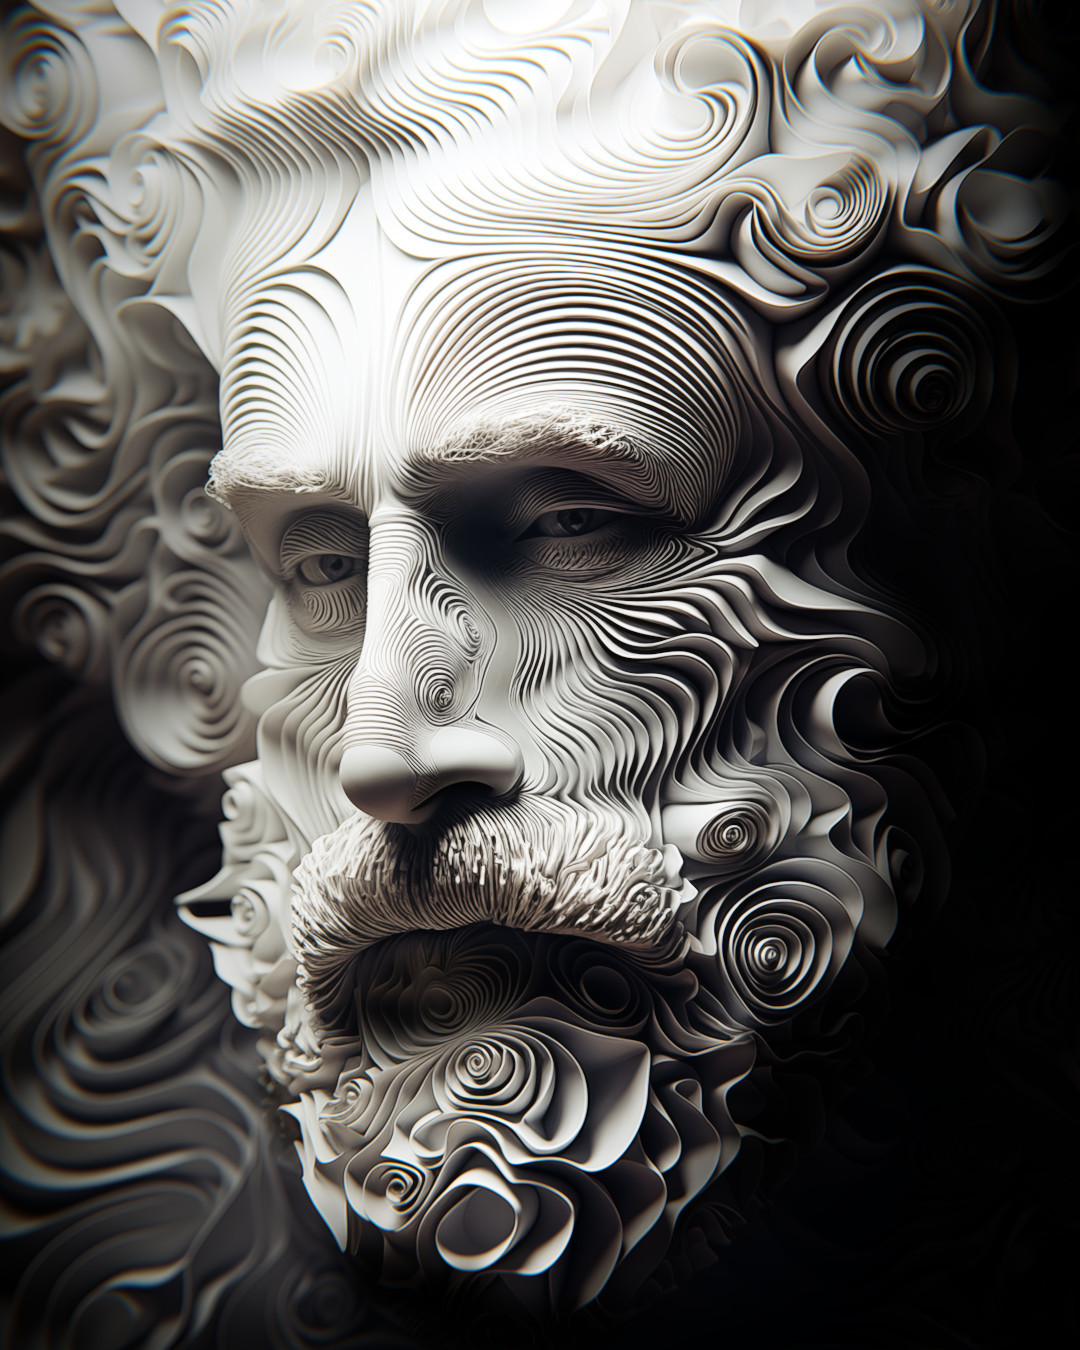 Bearded man, spirals and curves, black and white